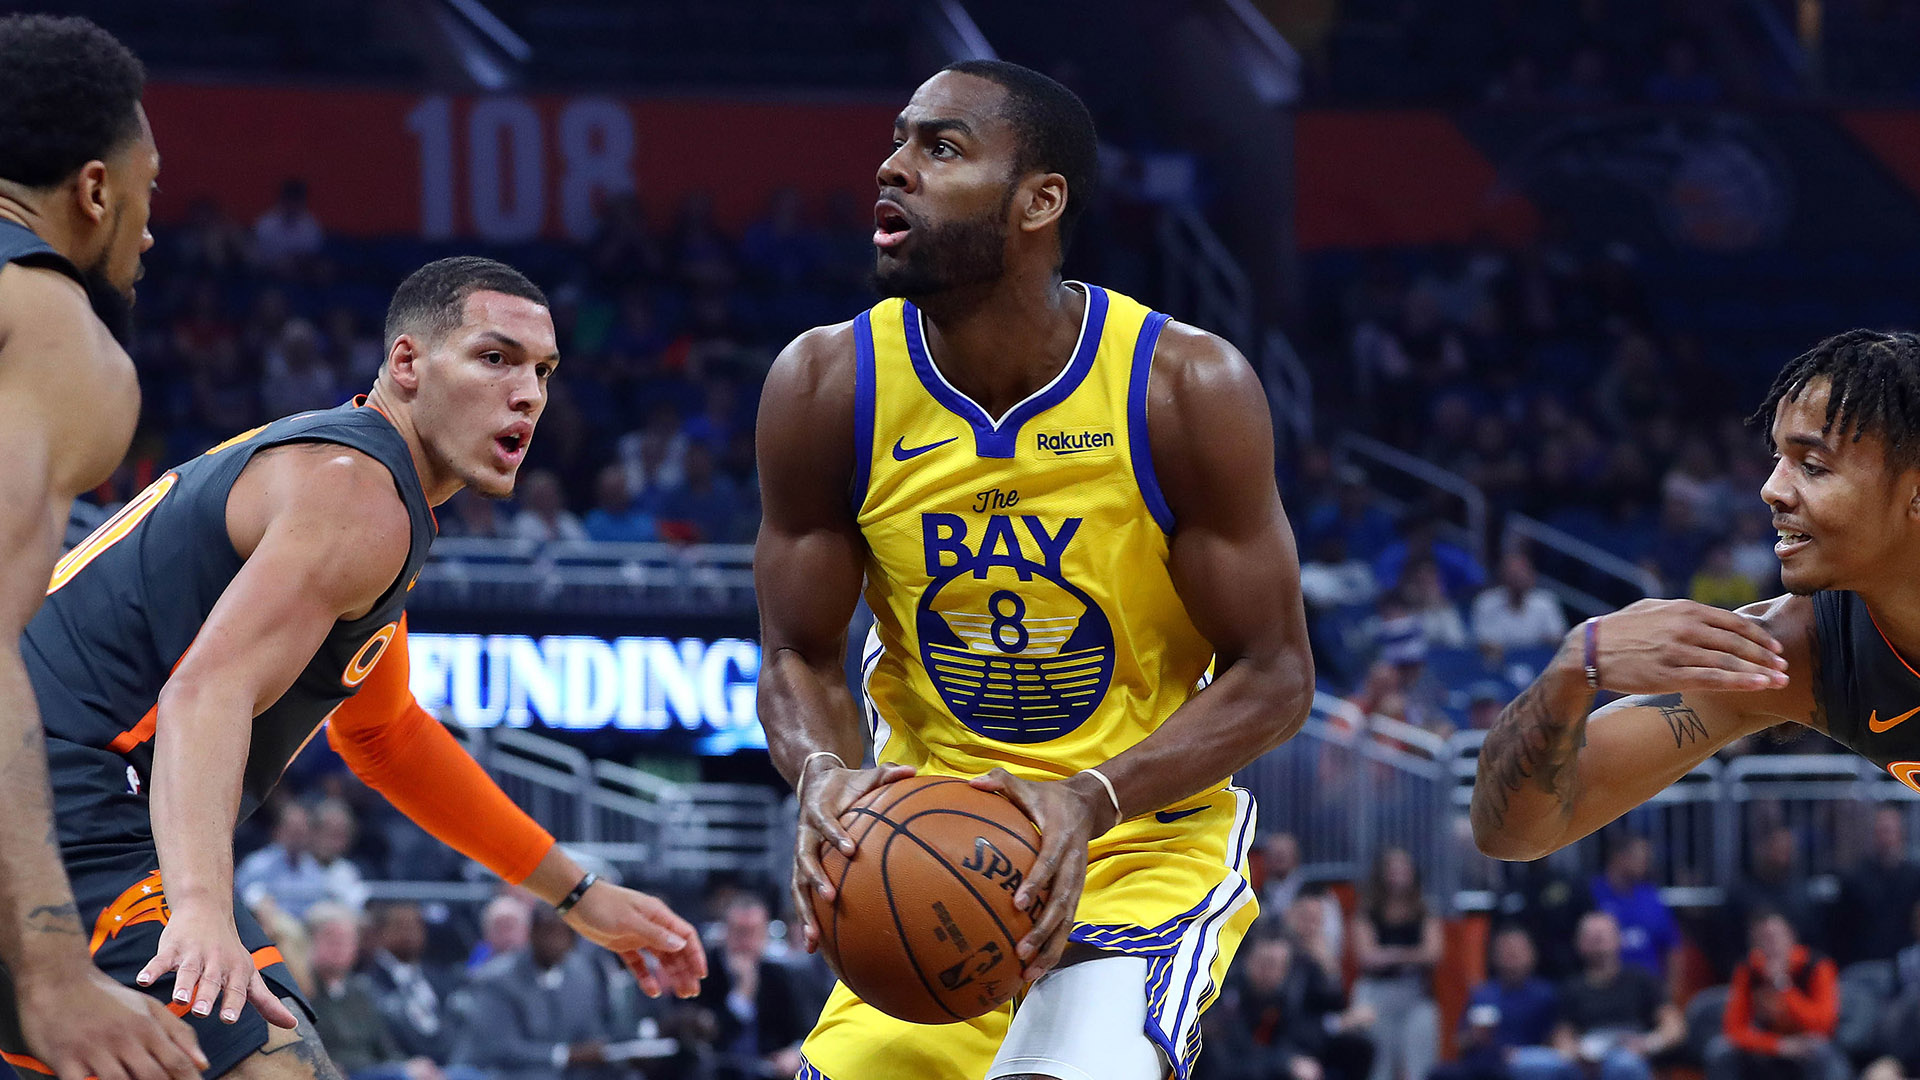 Alec Burks in Lakers will help in LeBron James Load Management